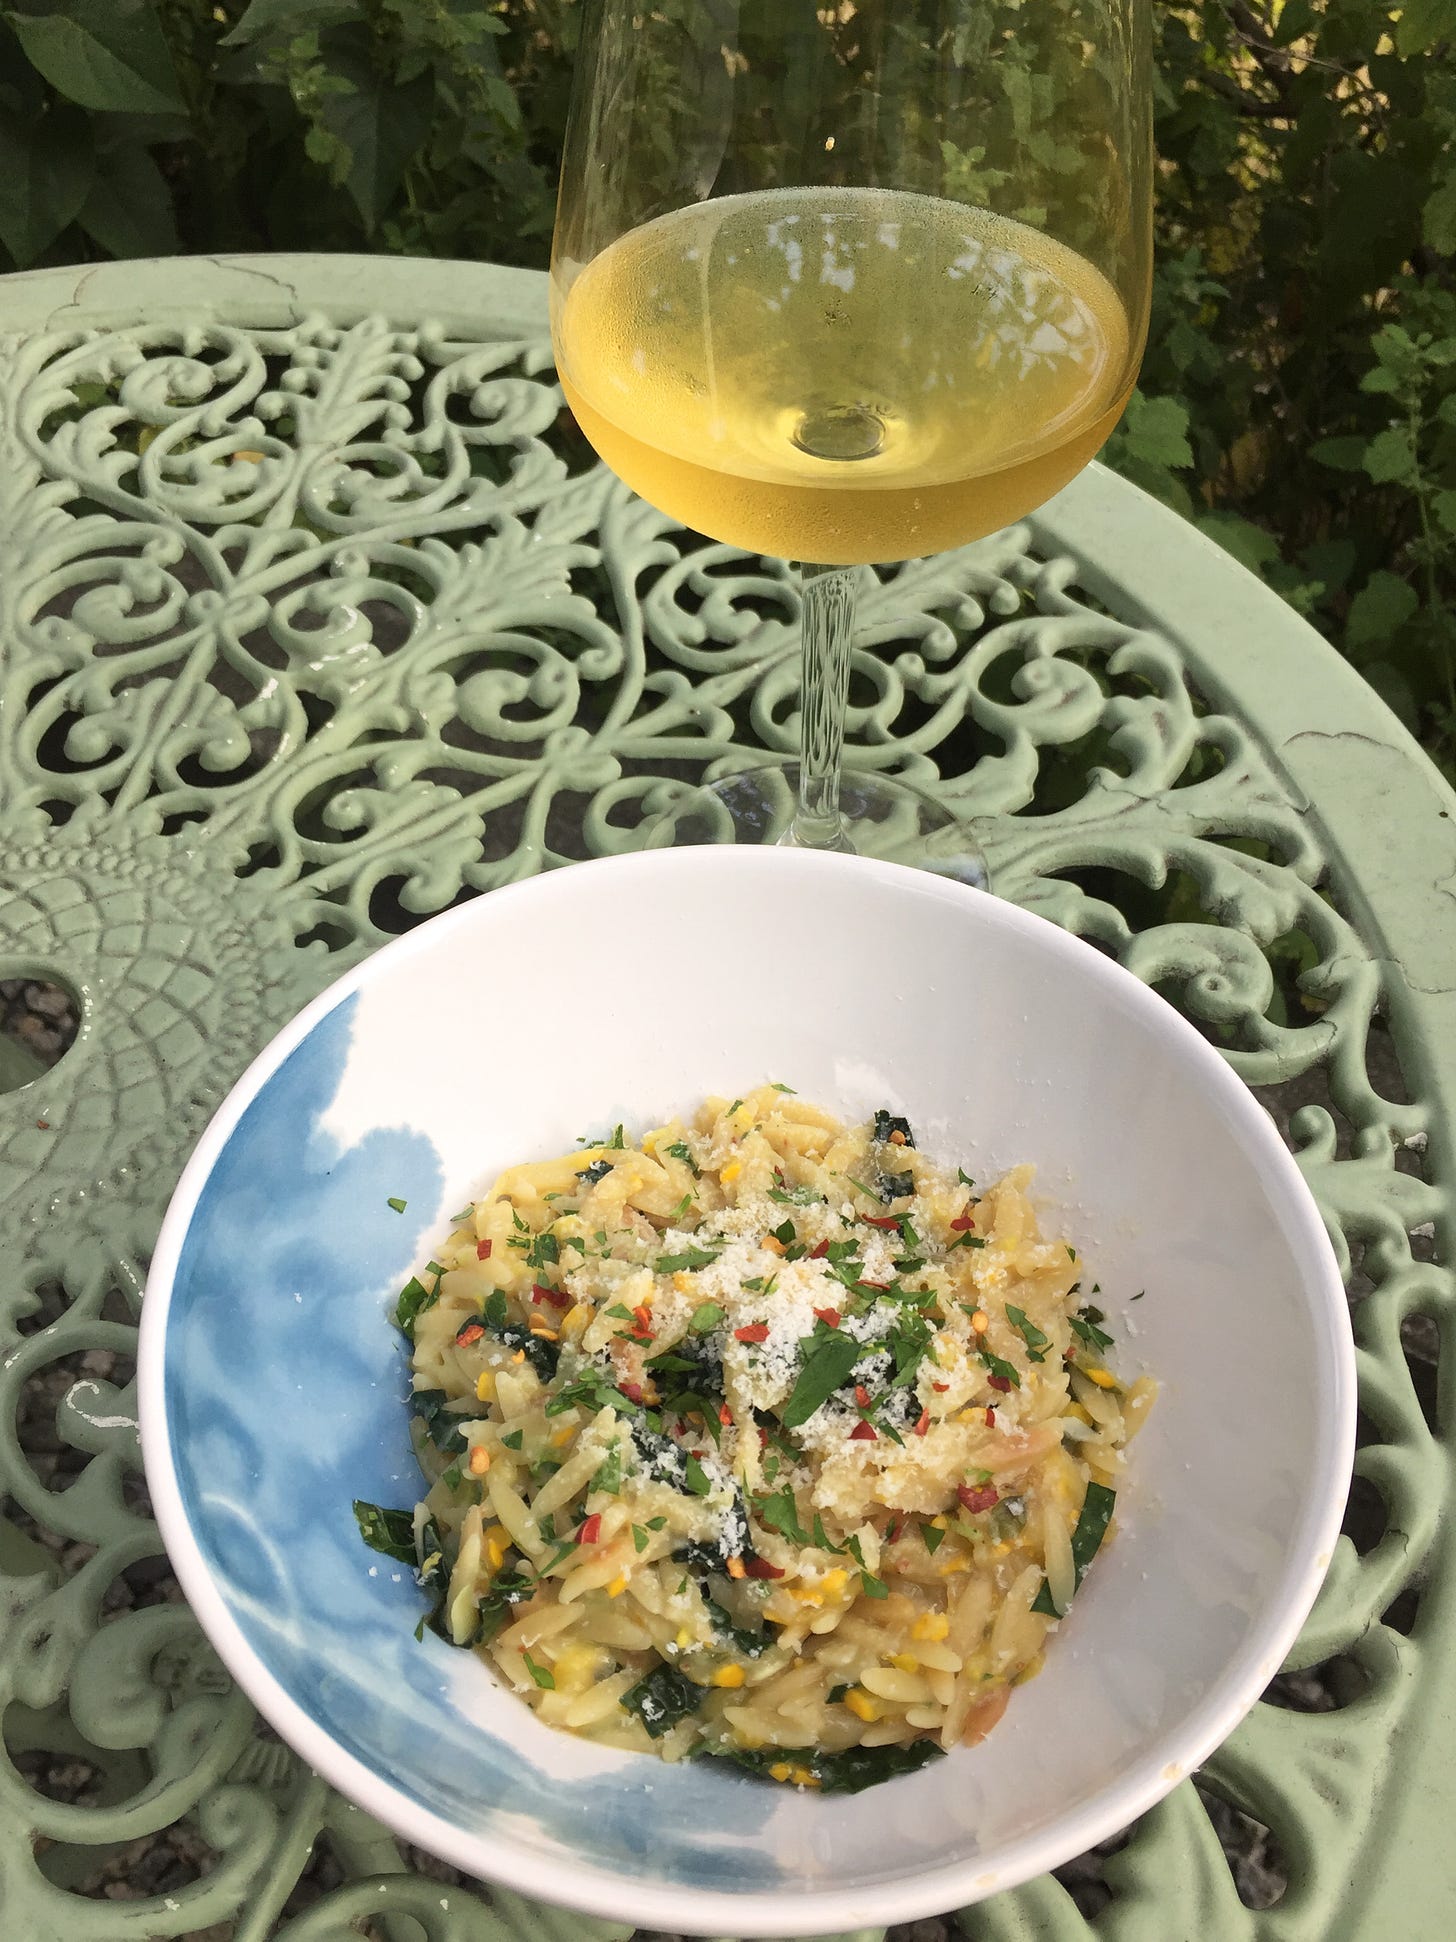 On a green wrought-iron table, a bowl of orzo with bits of kale and yellow zucchini visible throughout. On top is a sprinkling of parmesan, parsley, and chili flakes. A stemmed glass of white wine is behind the bowl.